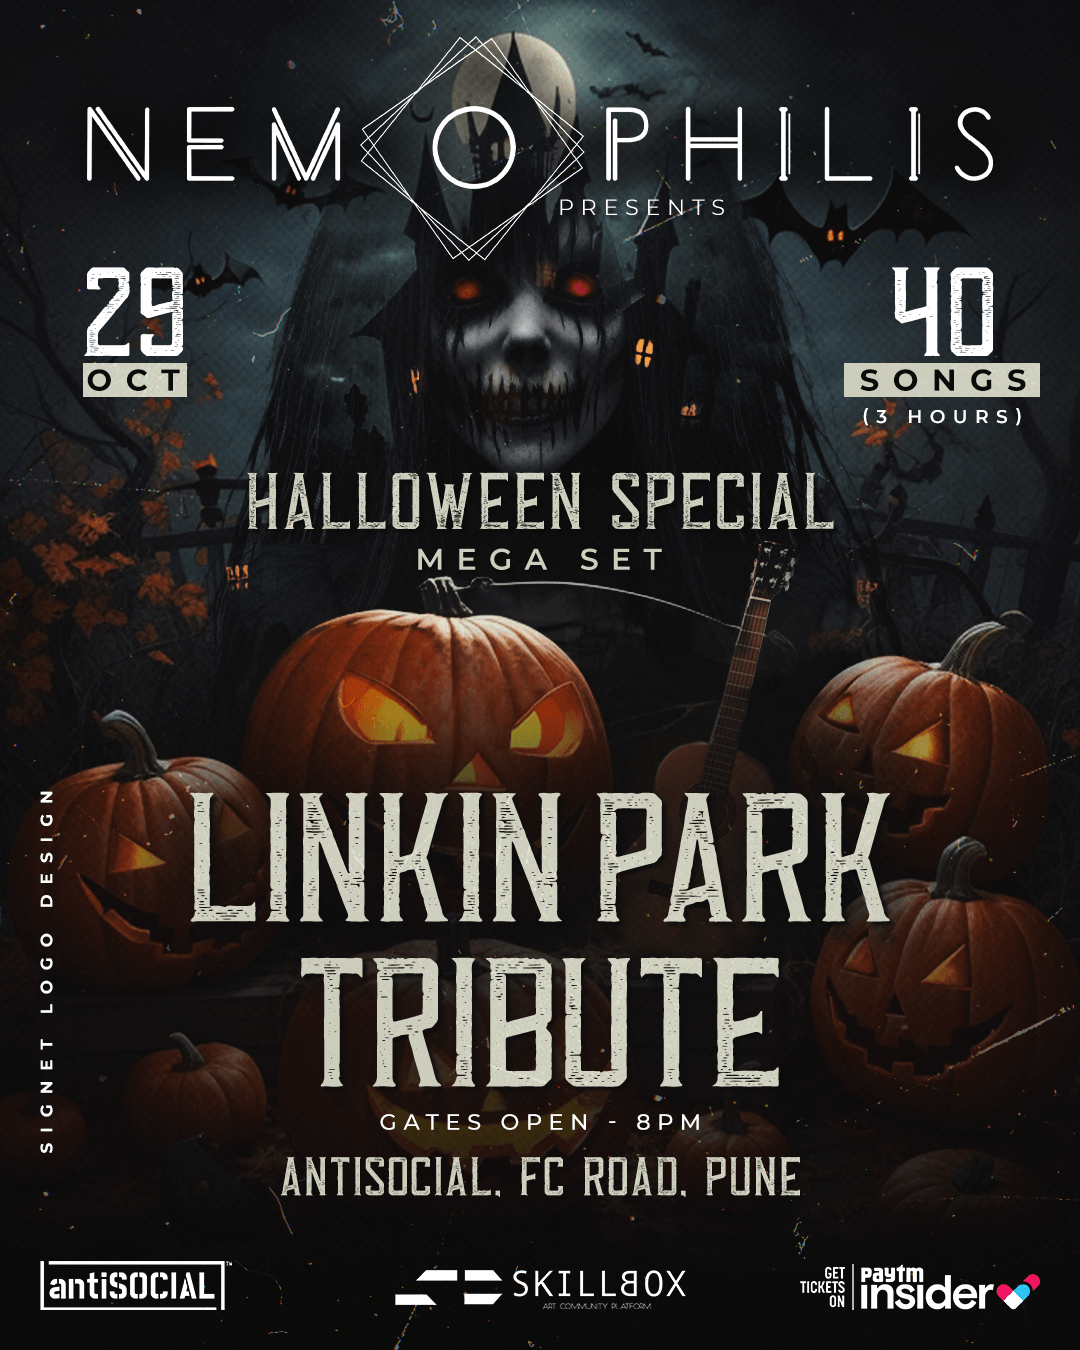 Photo-manipulated Social media Flyer design for Linkin Park Tribute event by Nemophilis, Pune
